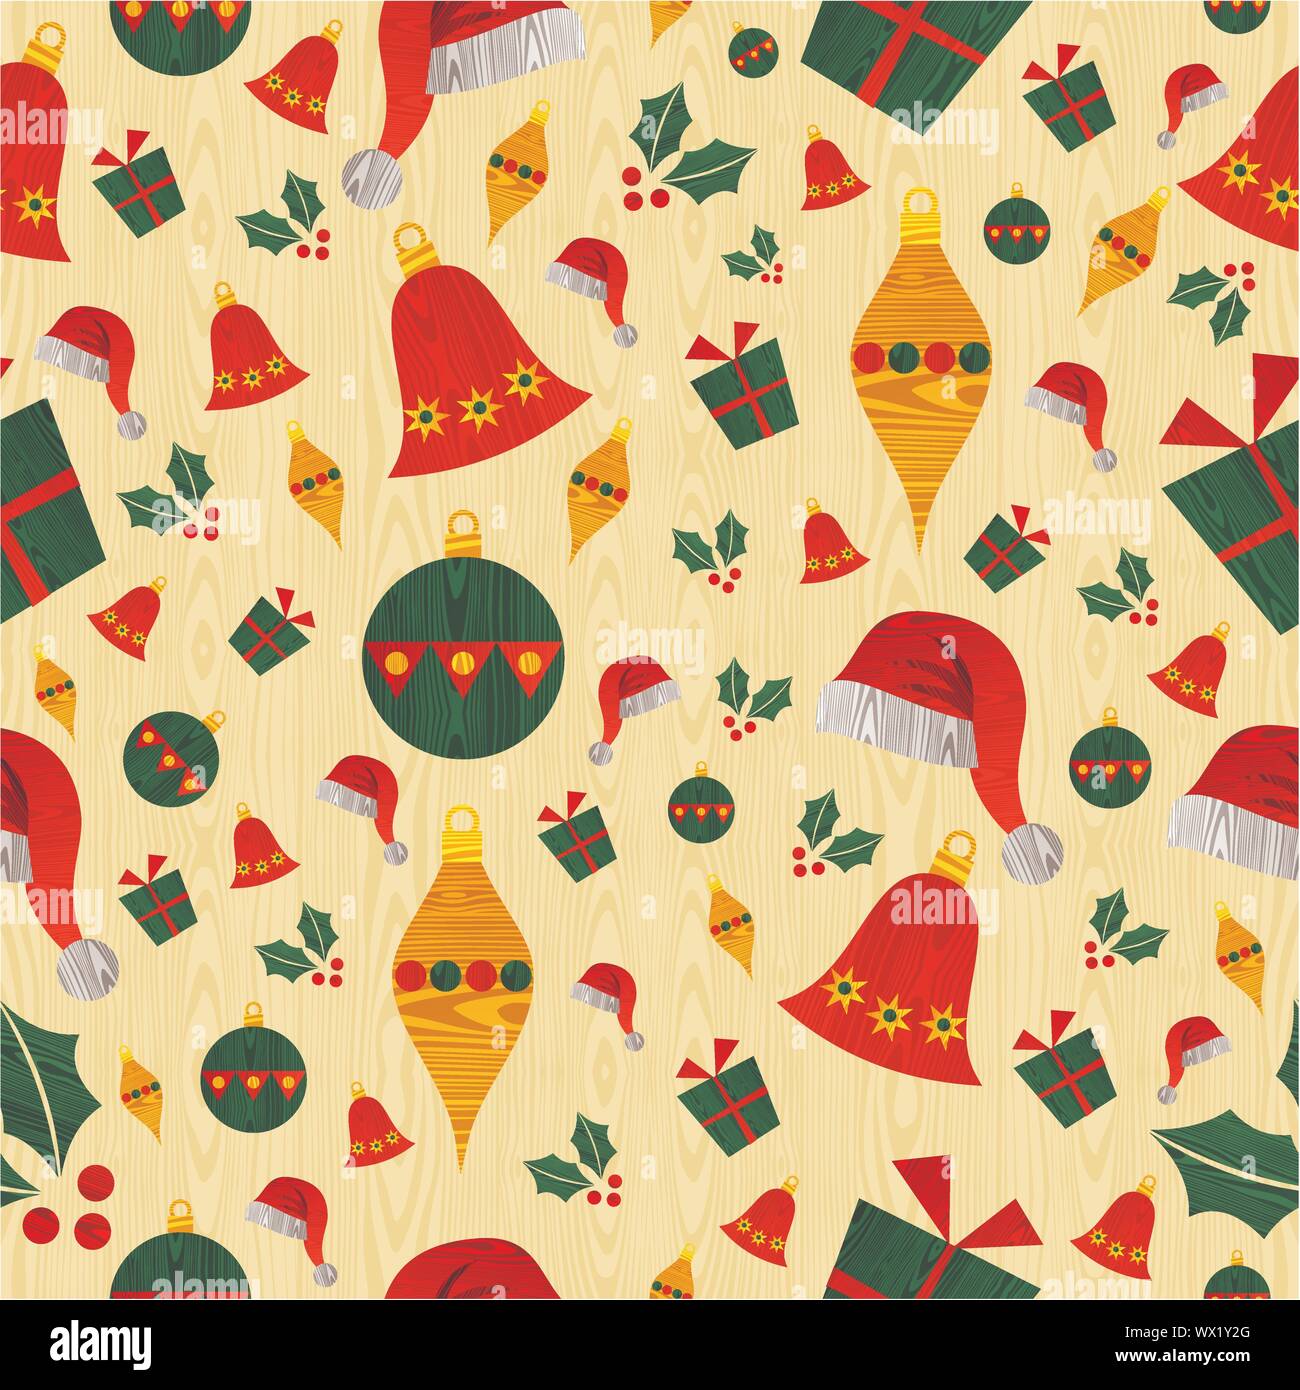 Christmas icons pattern background Stock Vector